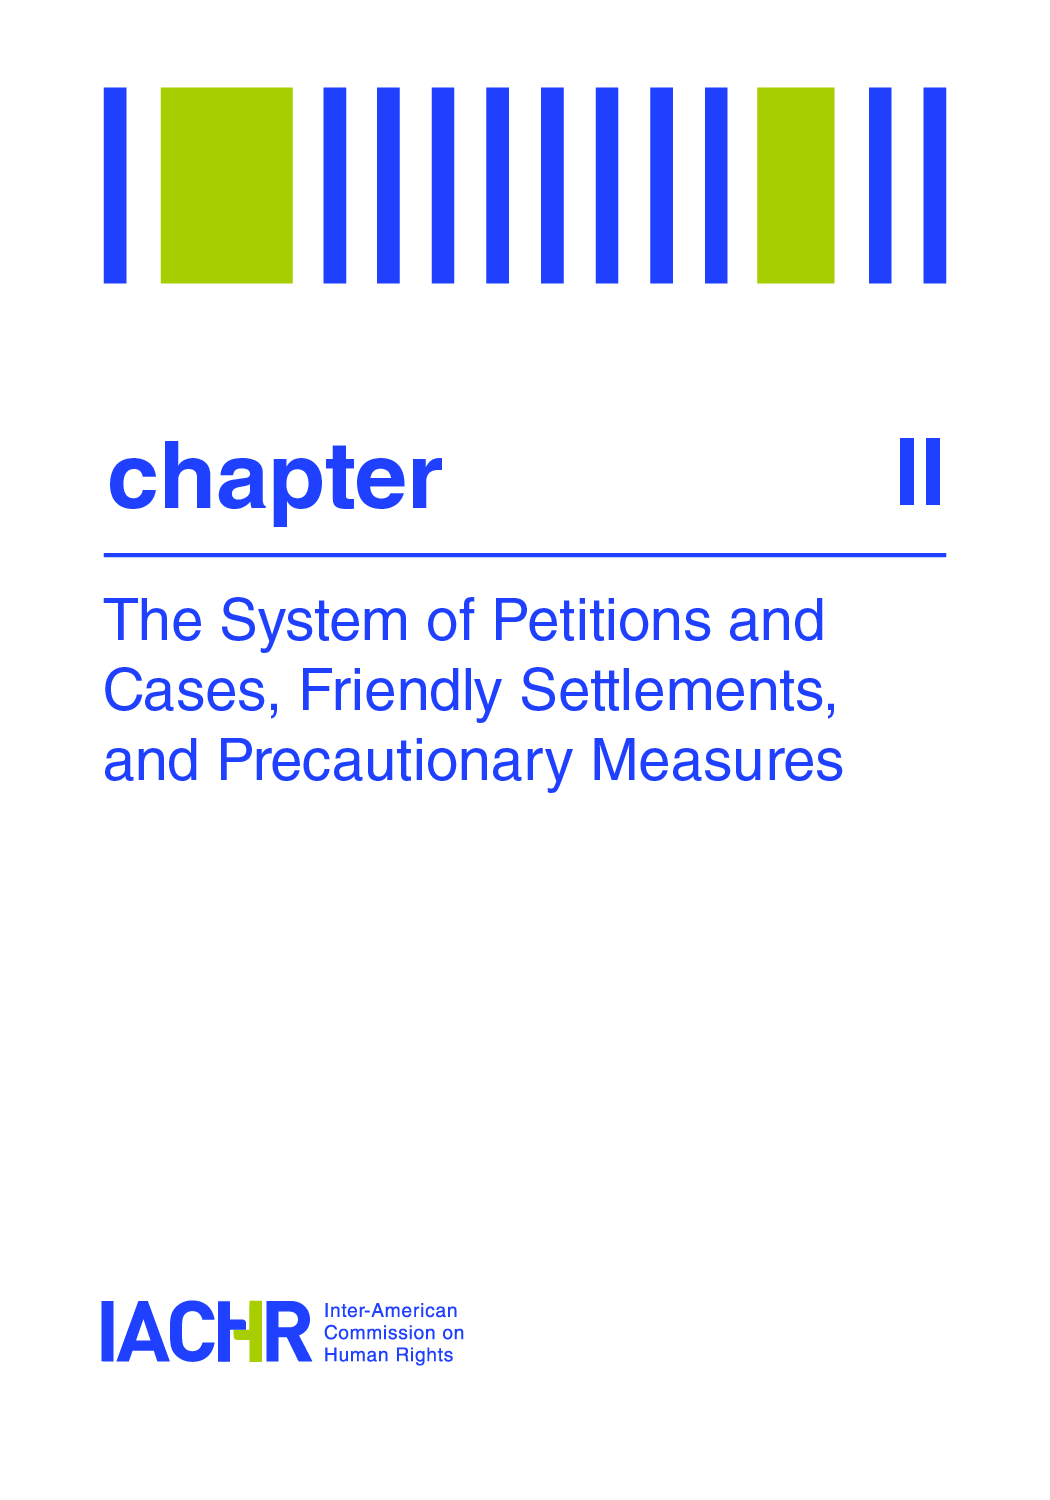 The System of Petitions and Cases, Friendly Settlements and Precautionary Measures